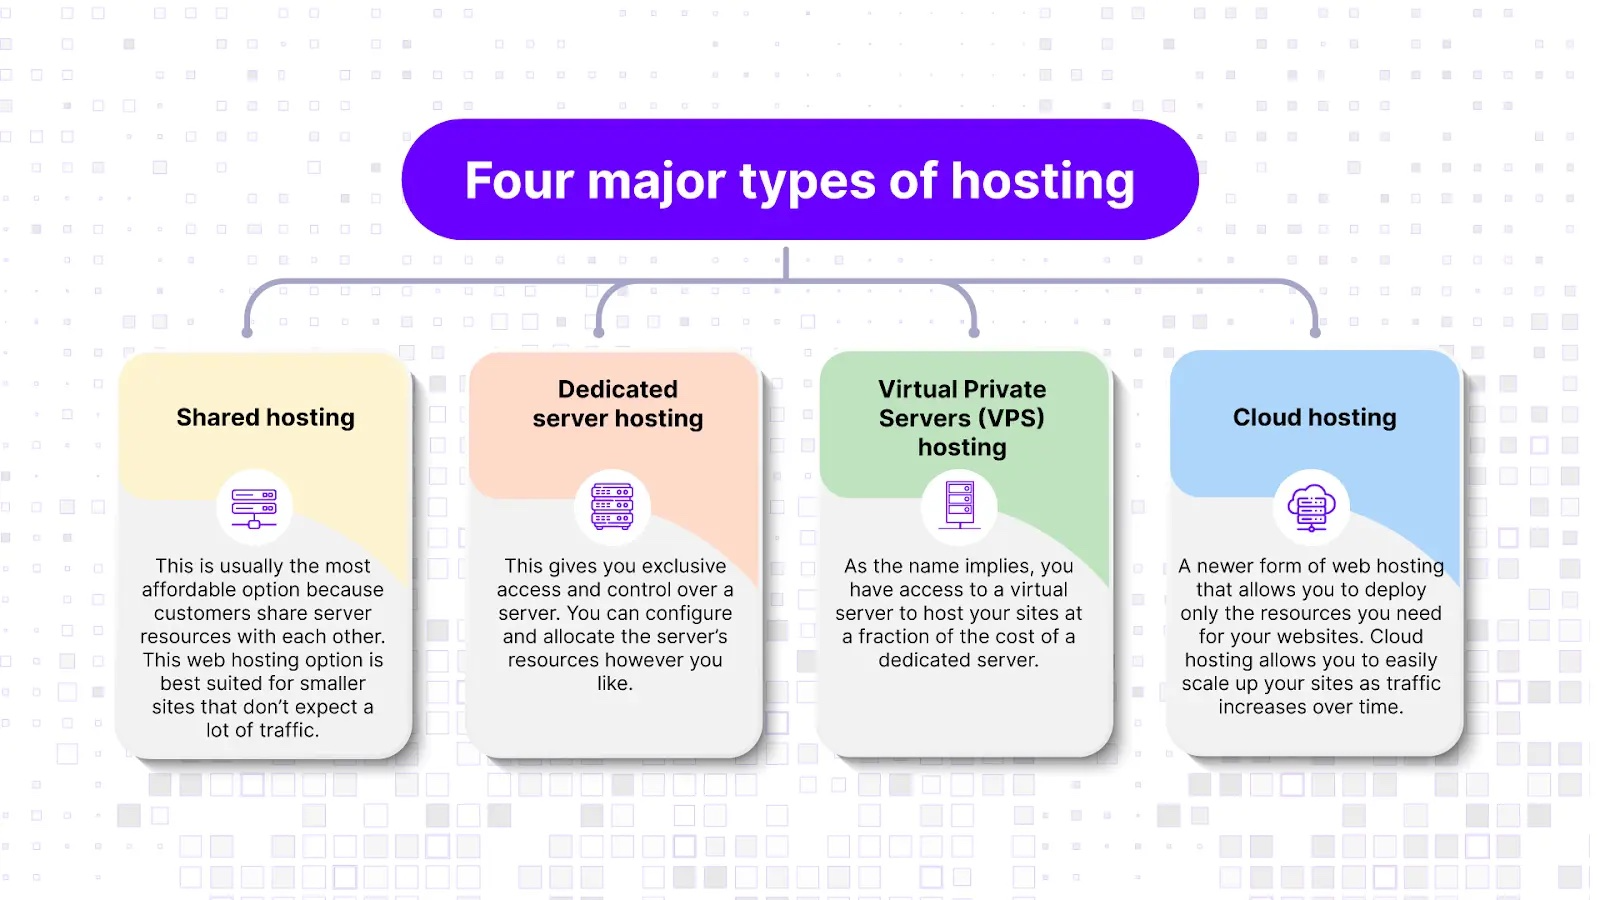 What type of web hosting will you offer?